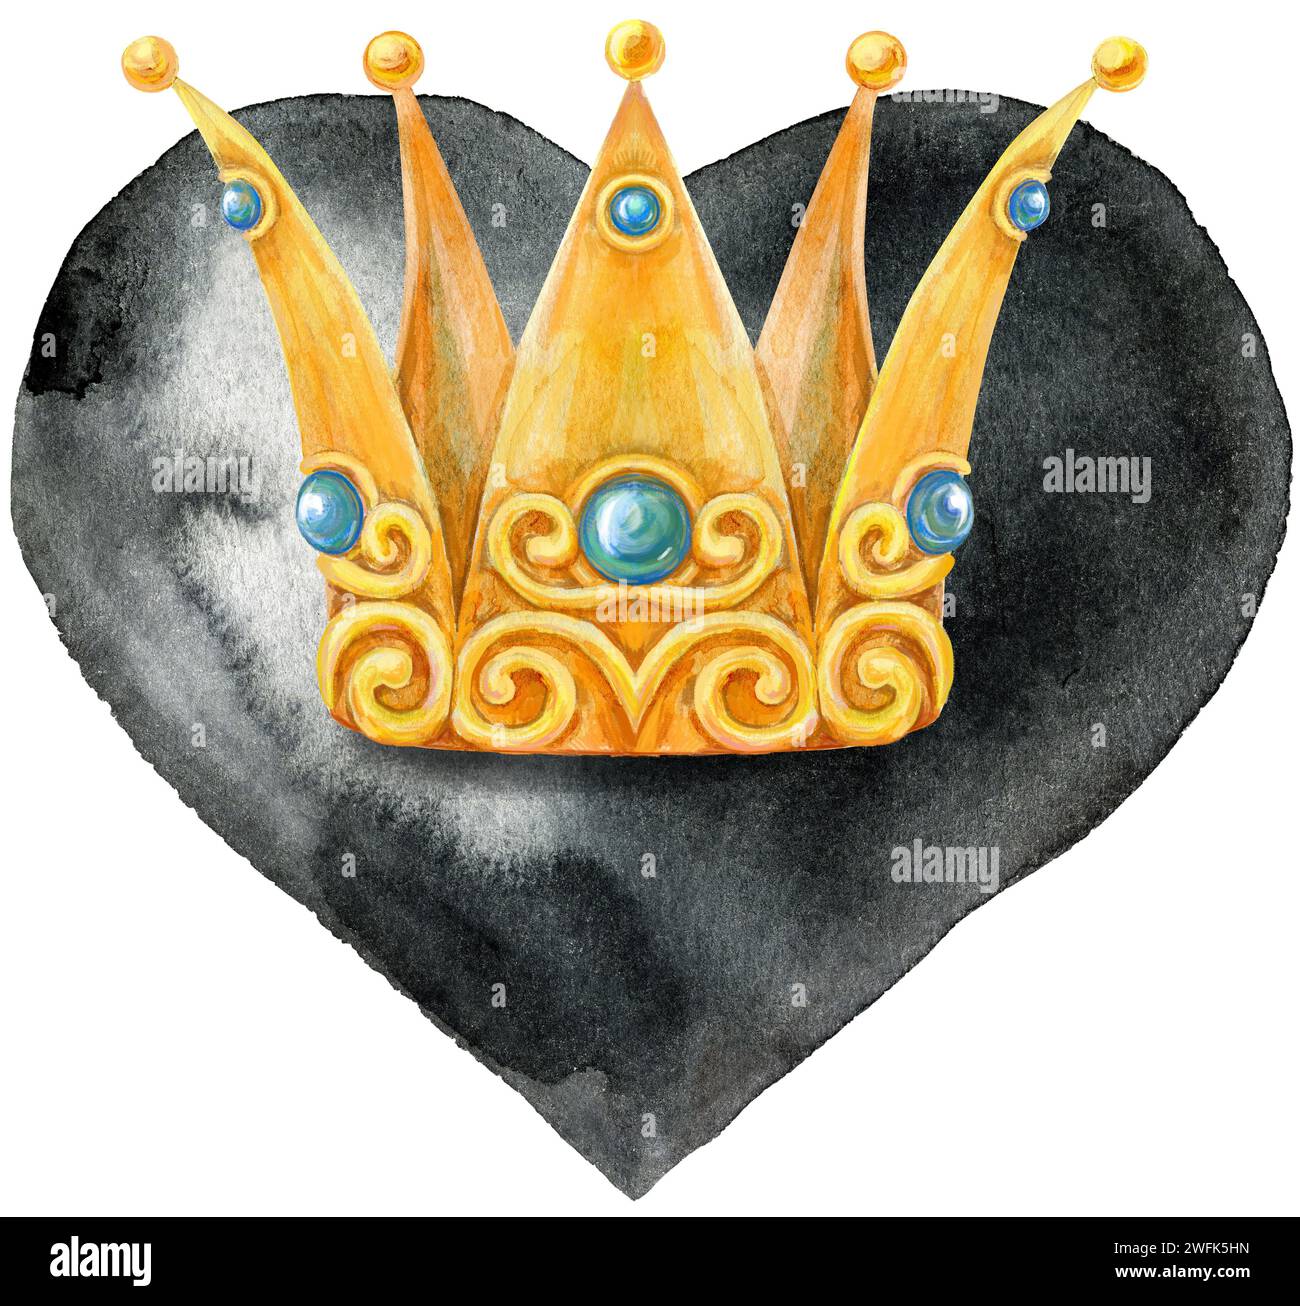 Watercolor black heart with golden crown, painted by hand Stock Photo